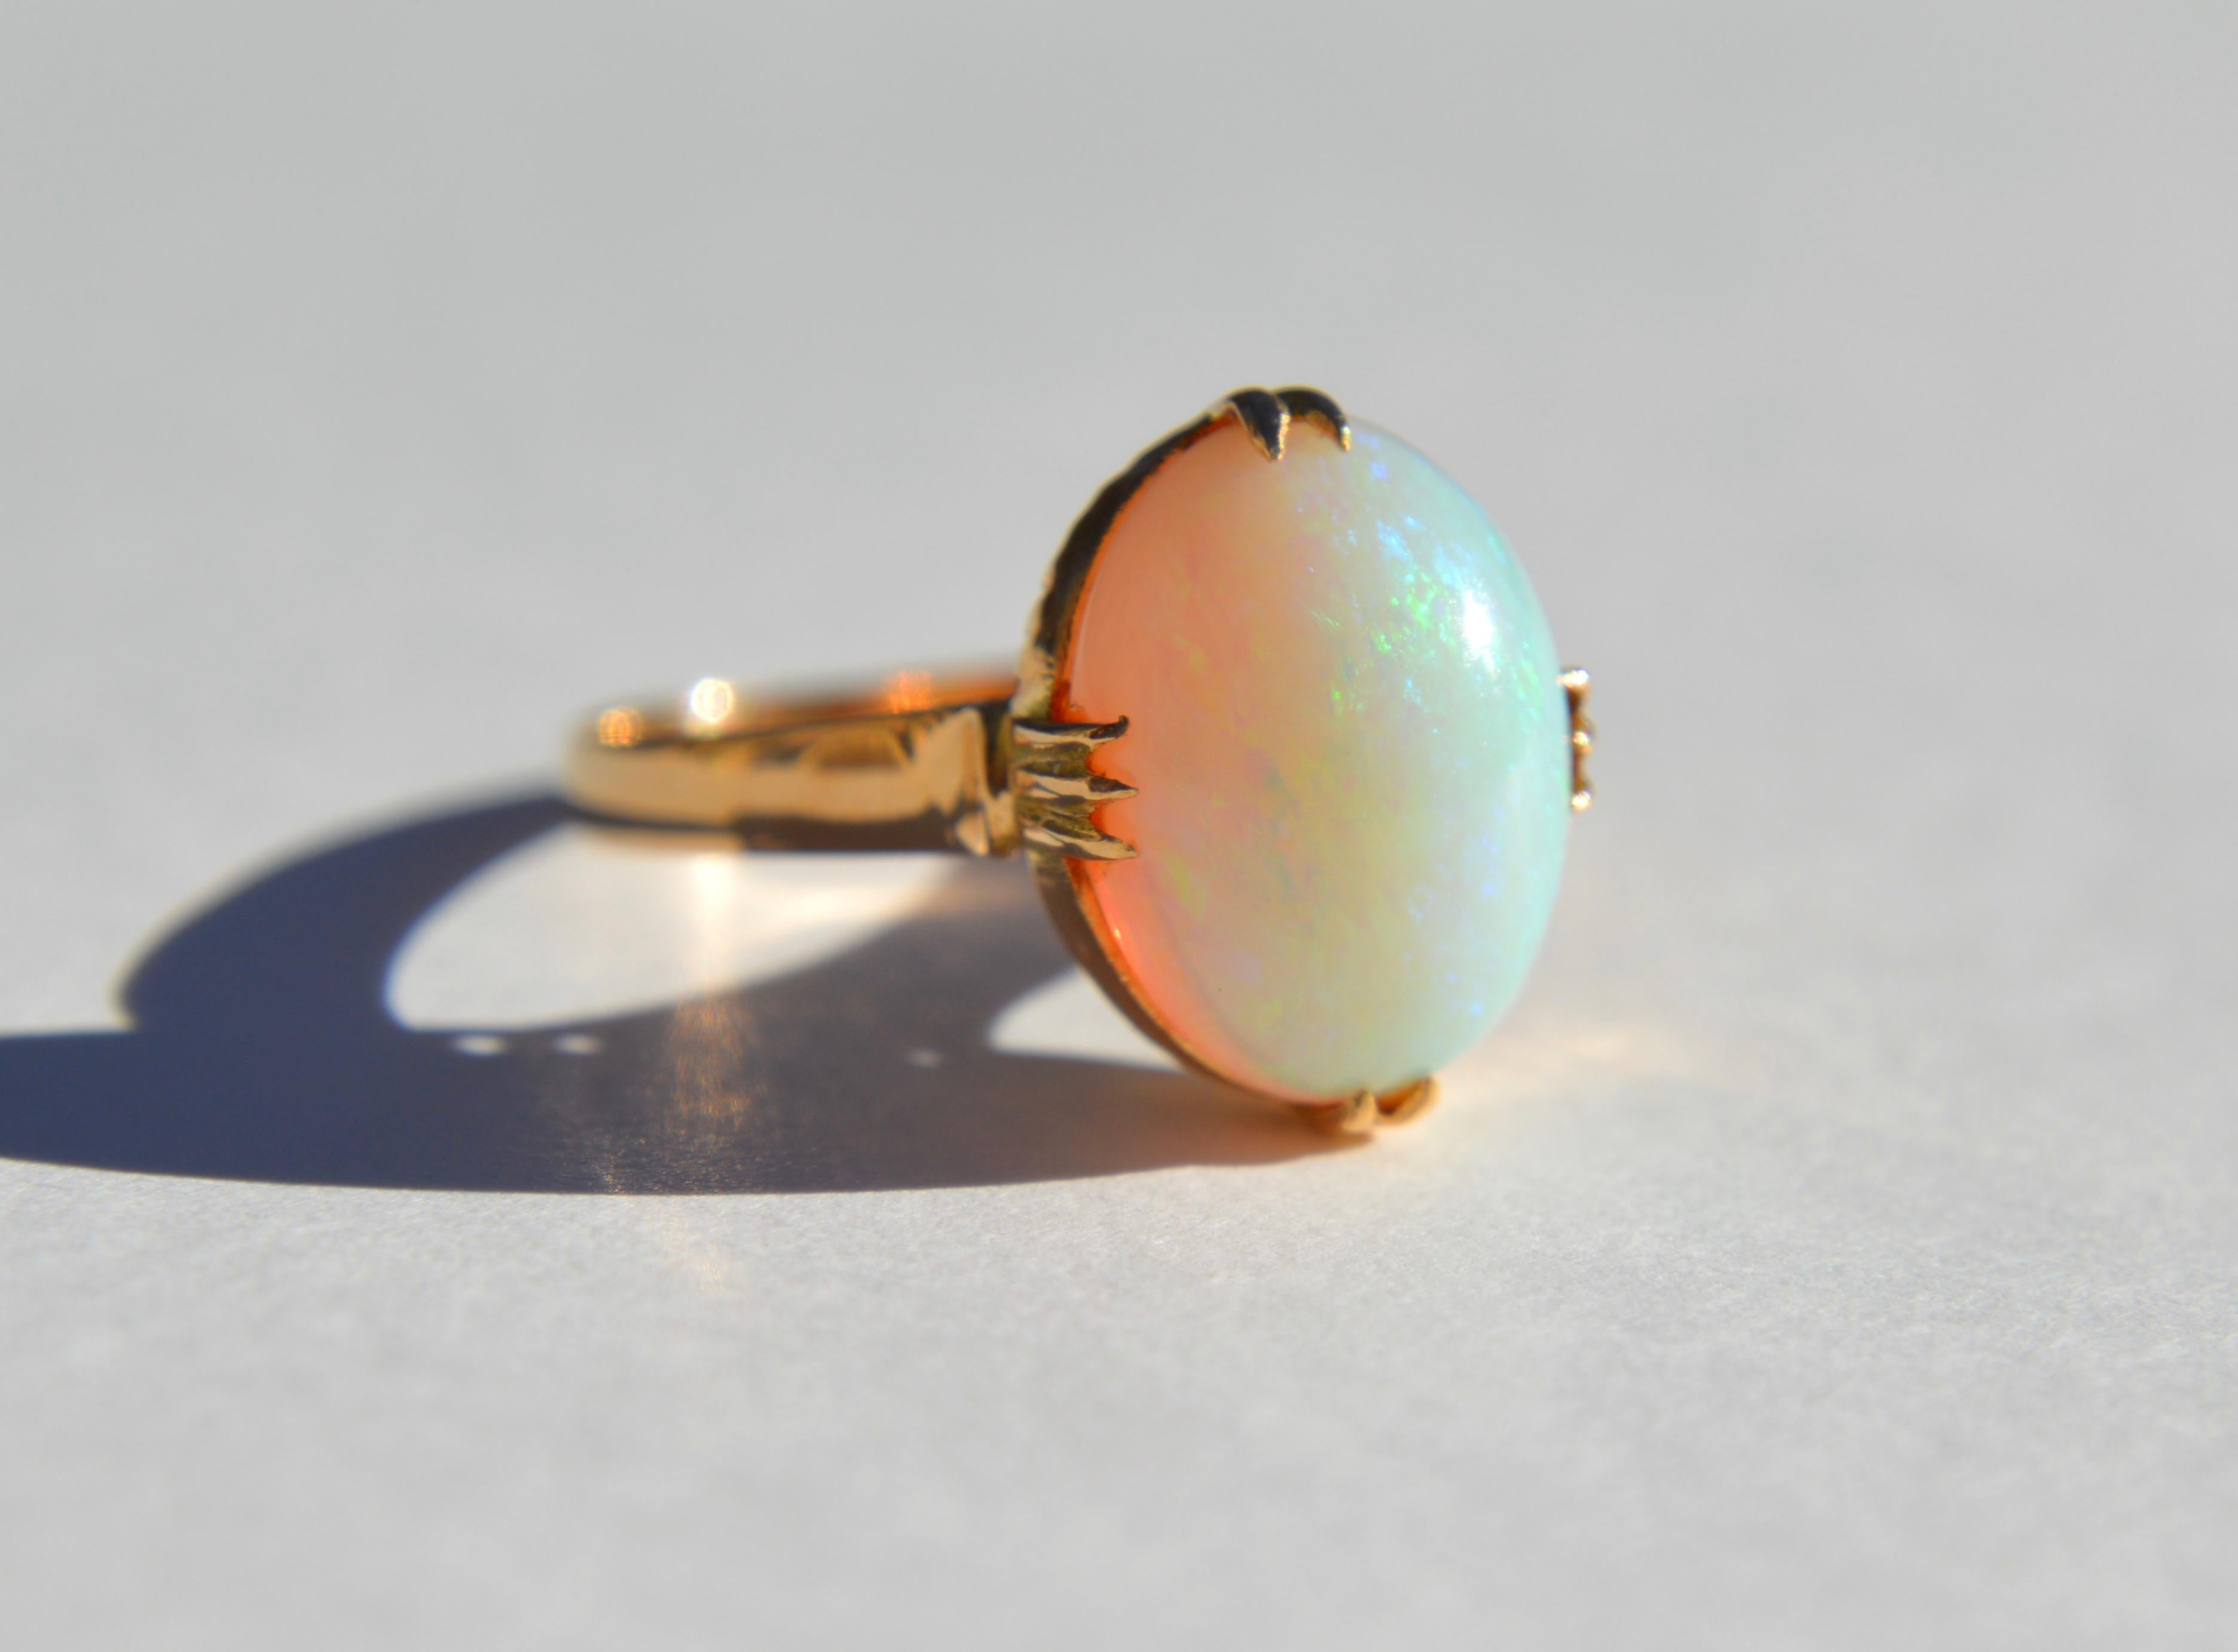 Exceptionally beautiful Victorian era antique circa late 1800s 4 carat fiery rainbow flecked Australian opal cabochon set in solid 18K rose gold. In very good condition, no scratches or wear to the opal. Ring has been polished and cleaned. Marked as